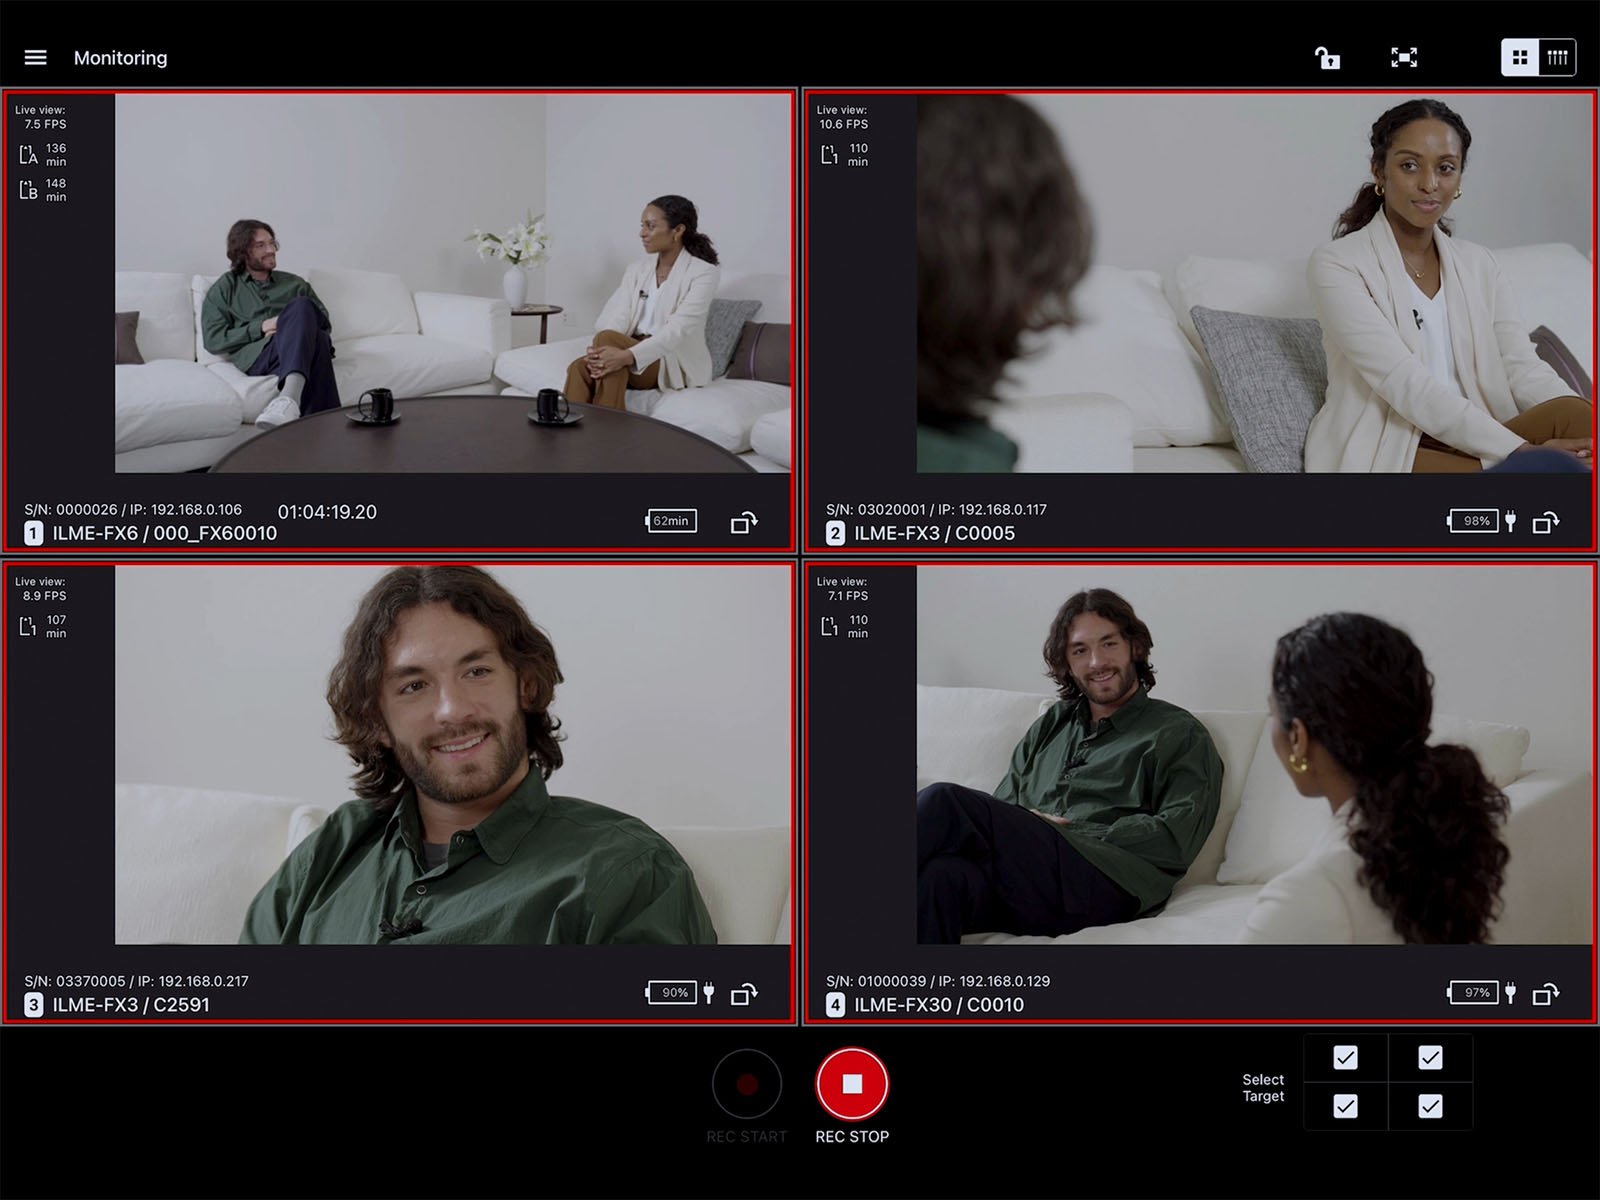 A split-screen view of a video call monitoring interface showing two people having a conversation. The top left and bottom right frames show them seated on a couch, while the bottom left and top right frames provide closer shots of each person. Interface controls are visible.